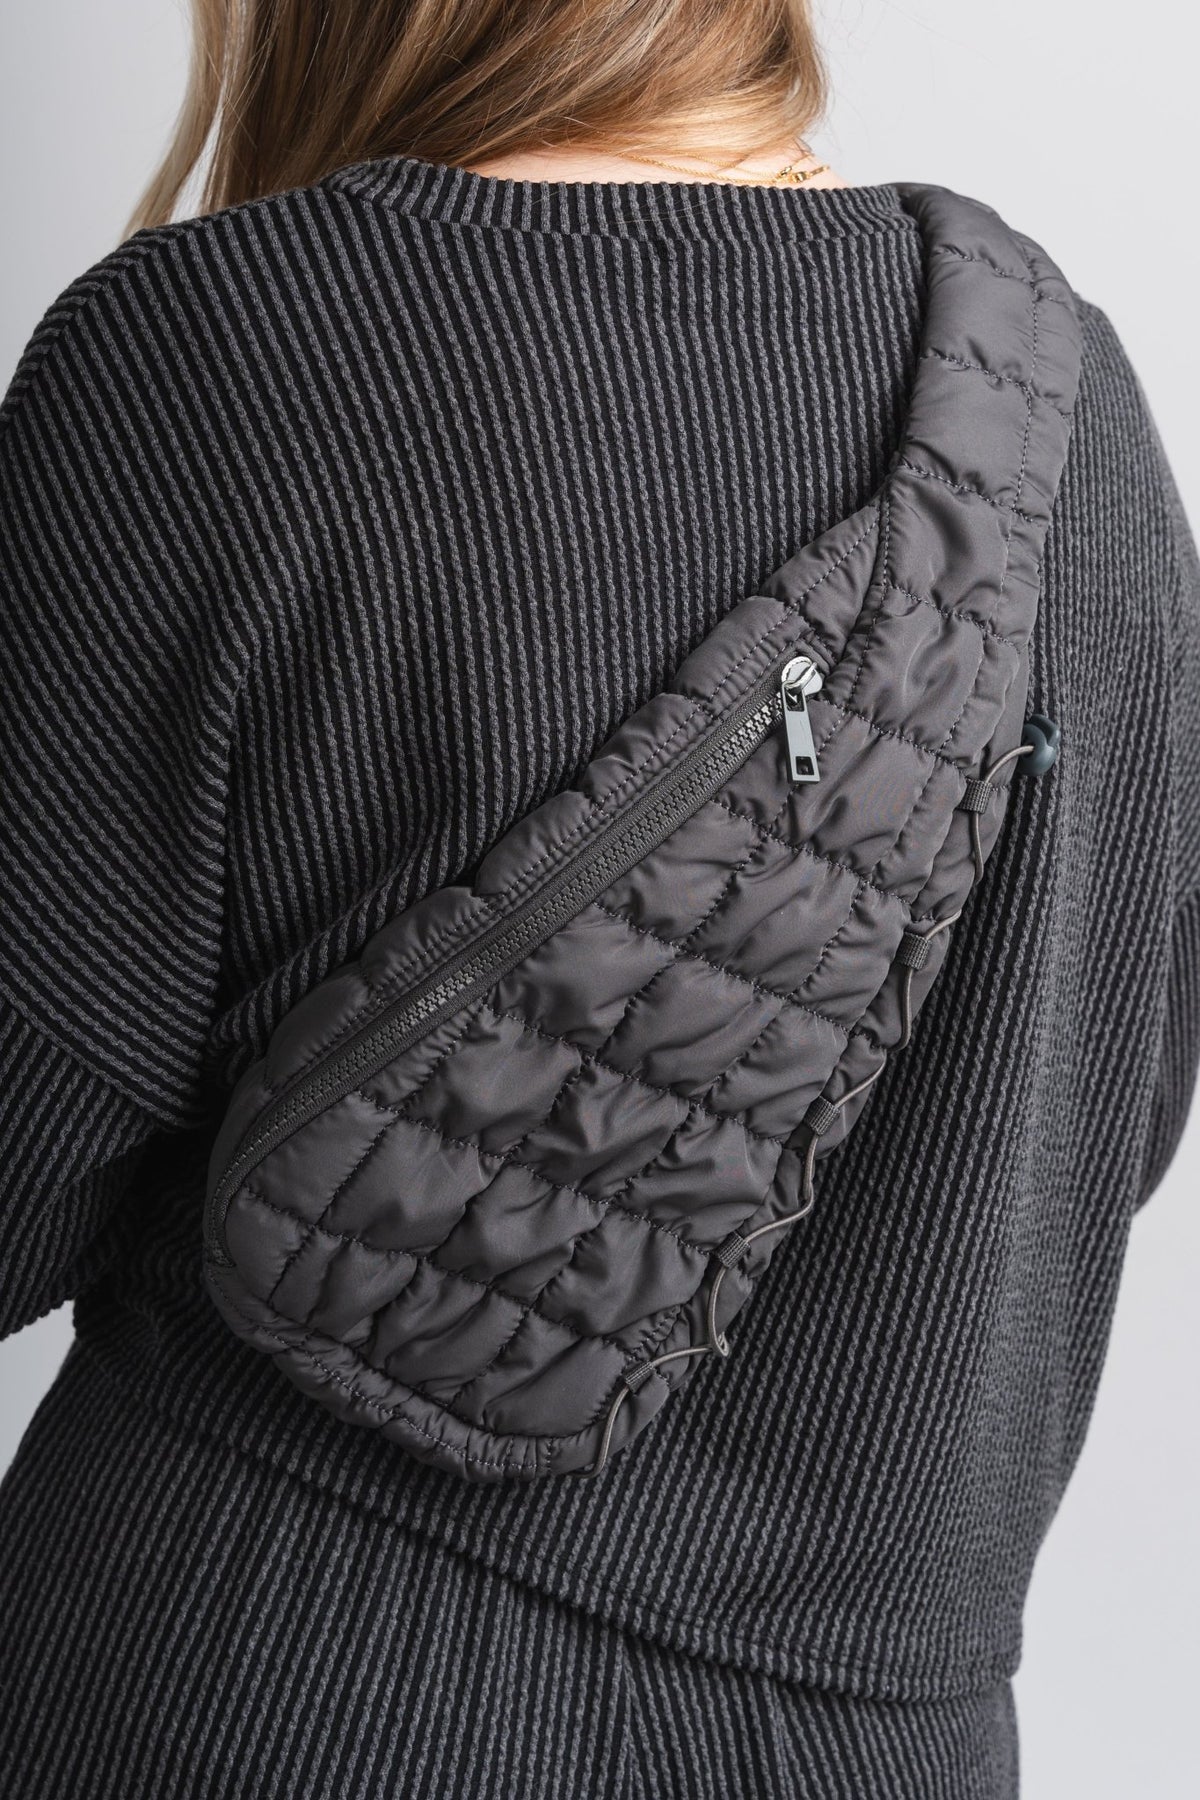 Quilted sling bag grey - Trendy Bags at Lush Fashion Lounge Boutique in Oklahoma City